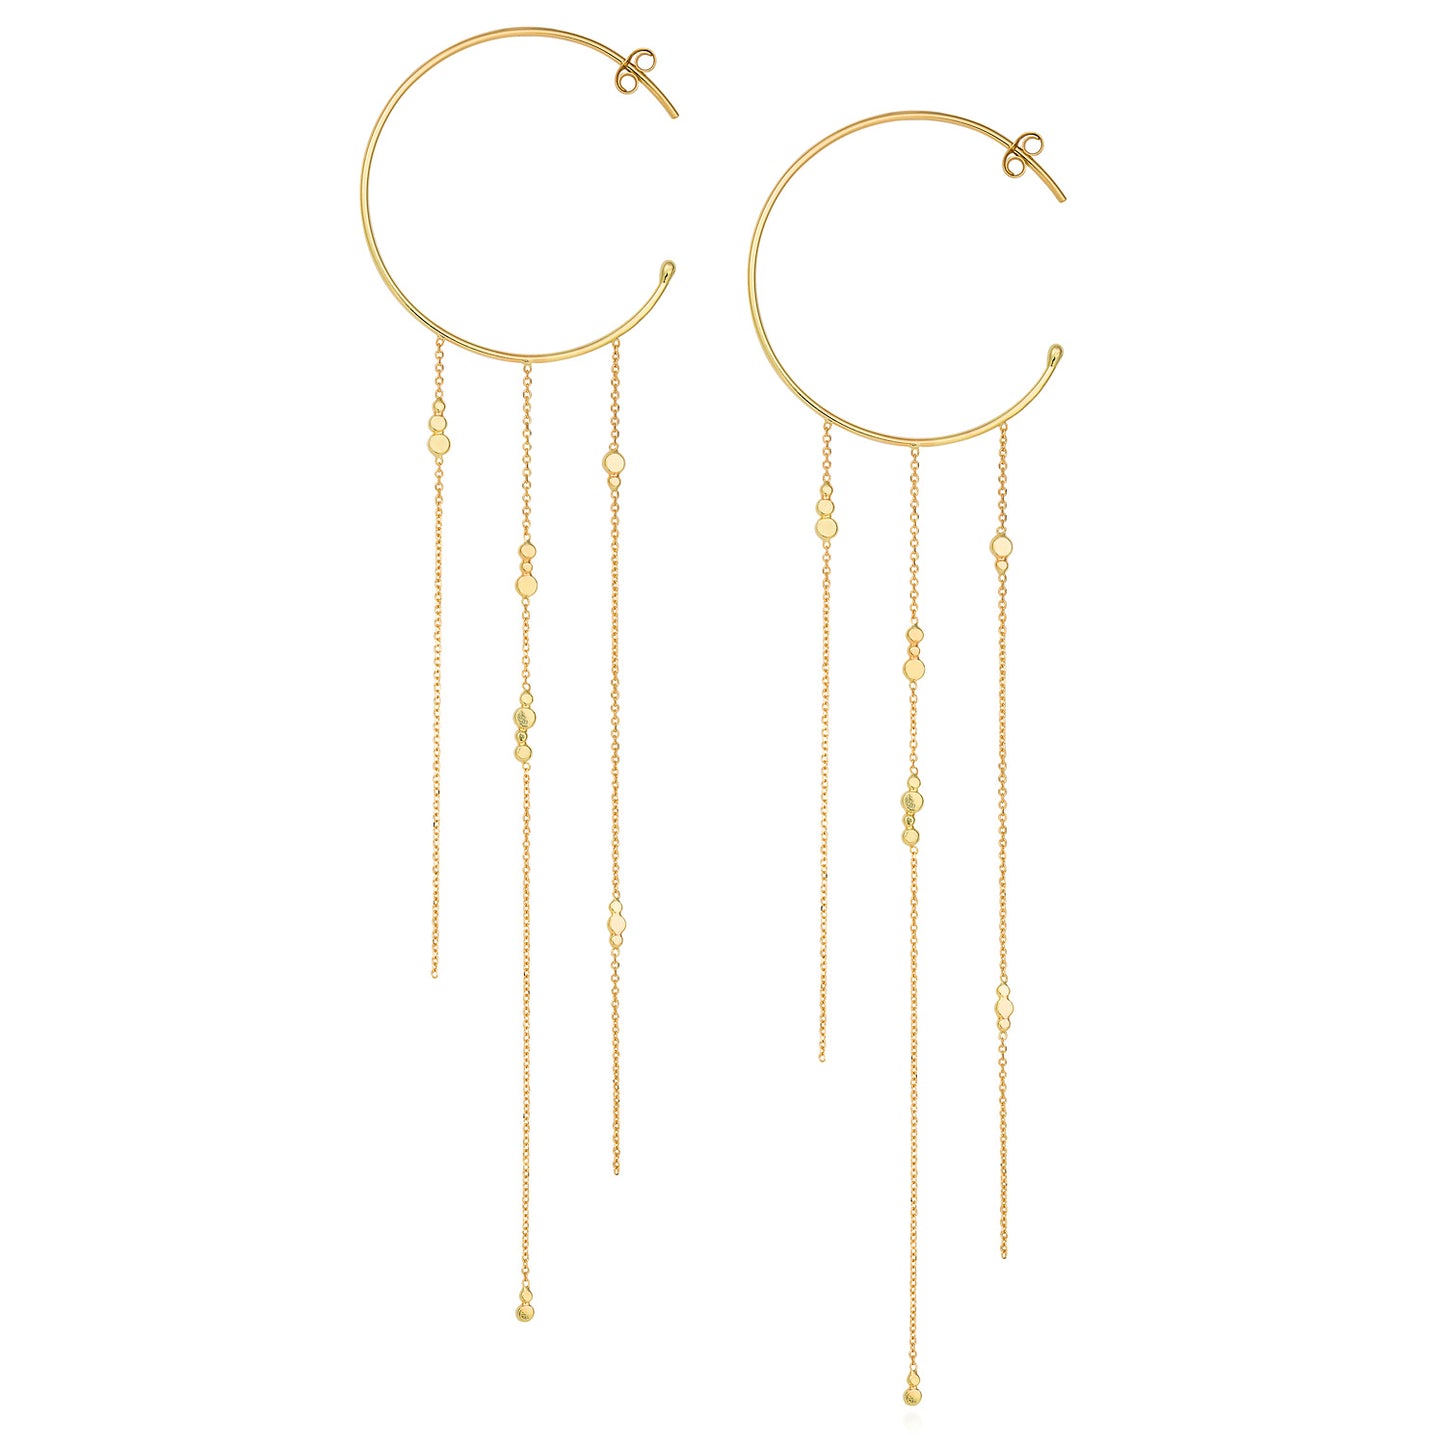 18ct yellow gold hoop earrings with 3 strands of fine chain with Bits and Bobs